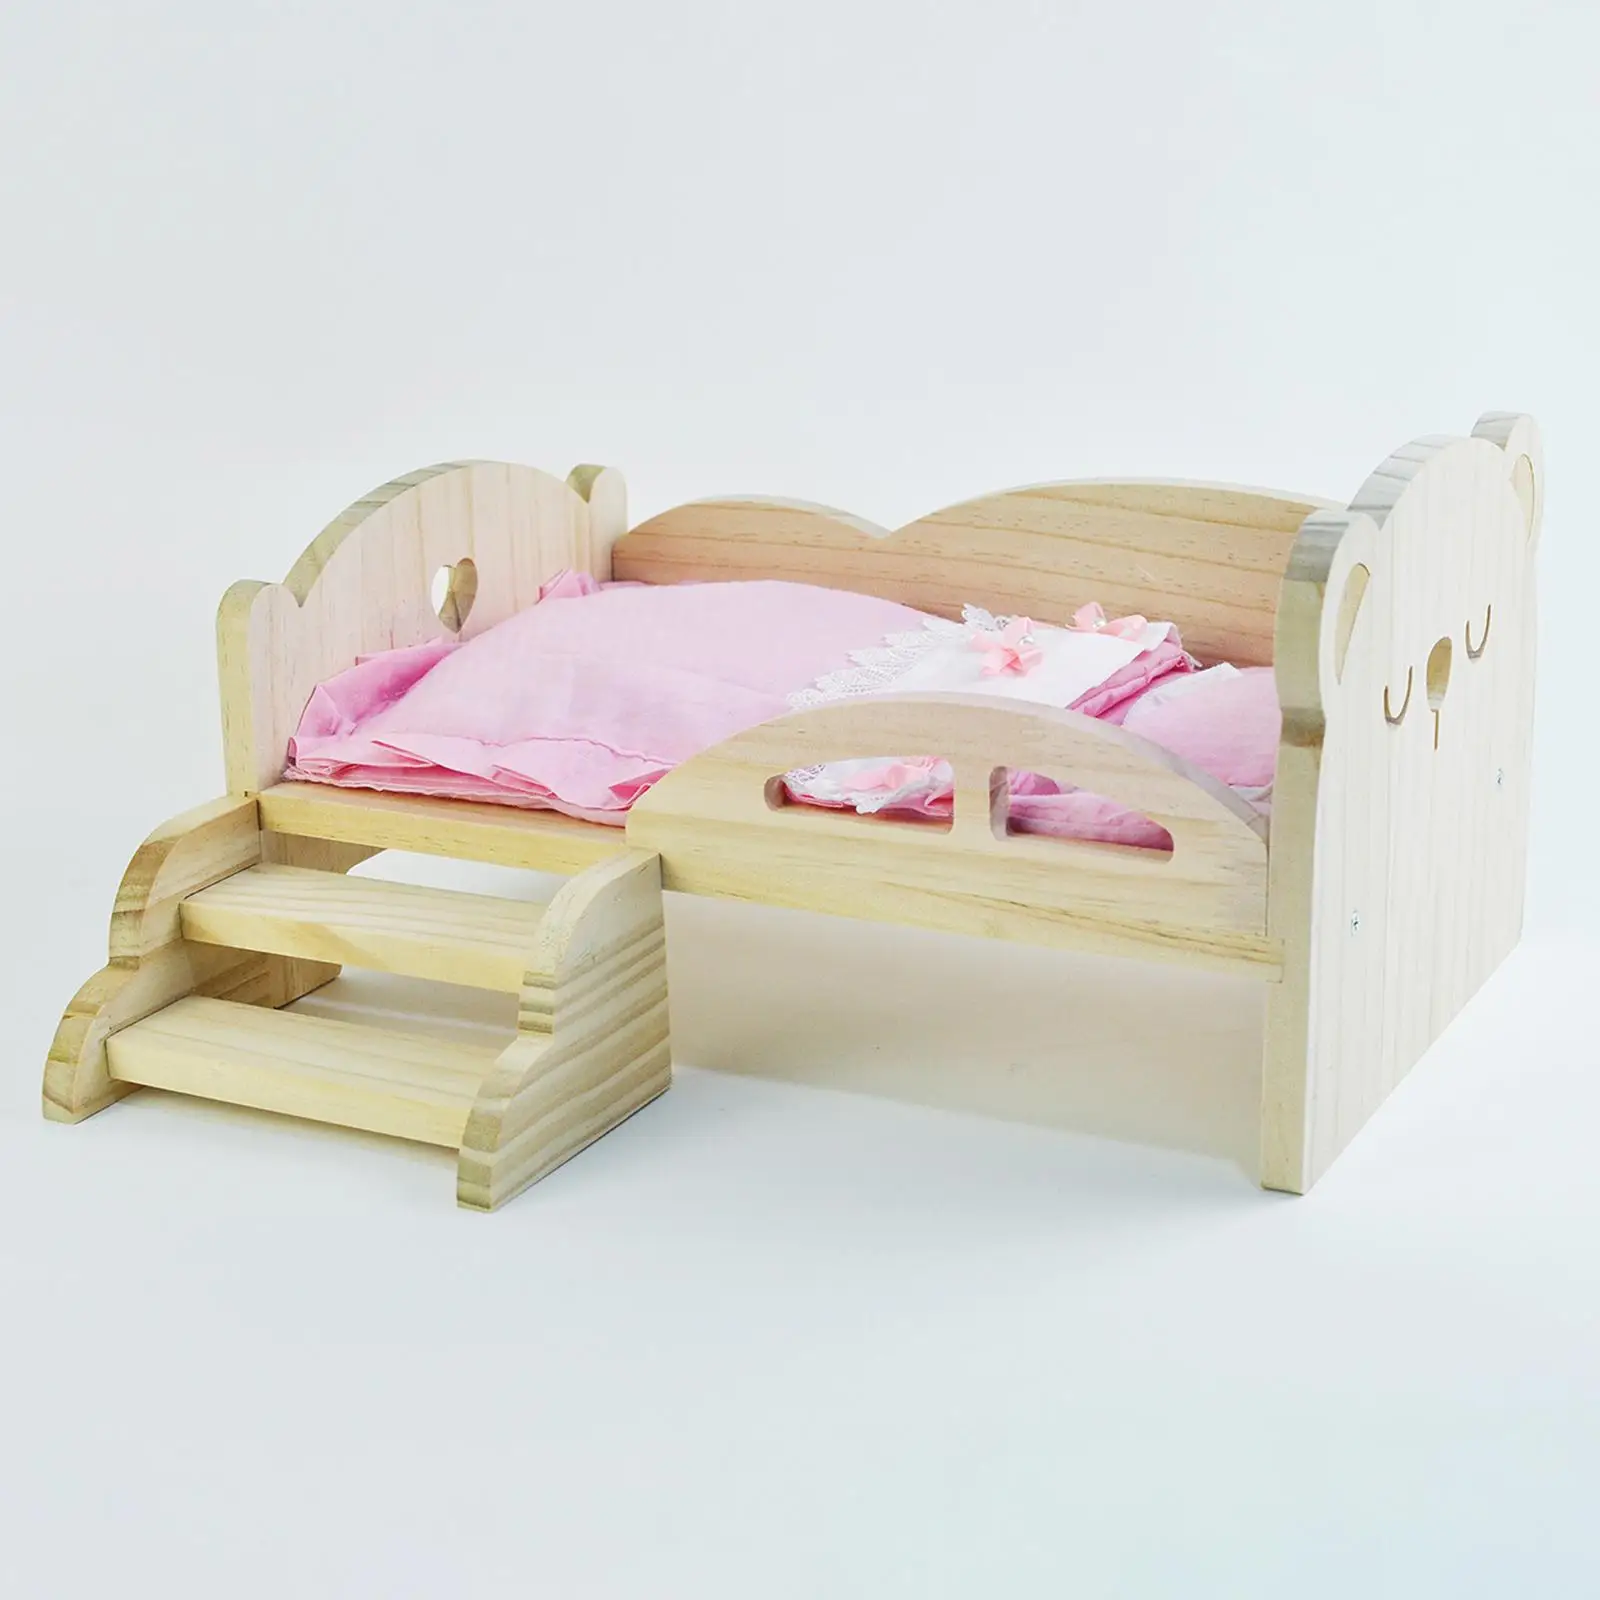 Simulation Doll Miniature Bed with Stairs 30cm 1/6 Dolls Furniture Set